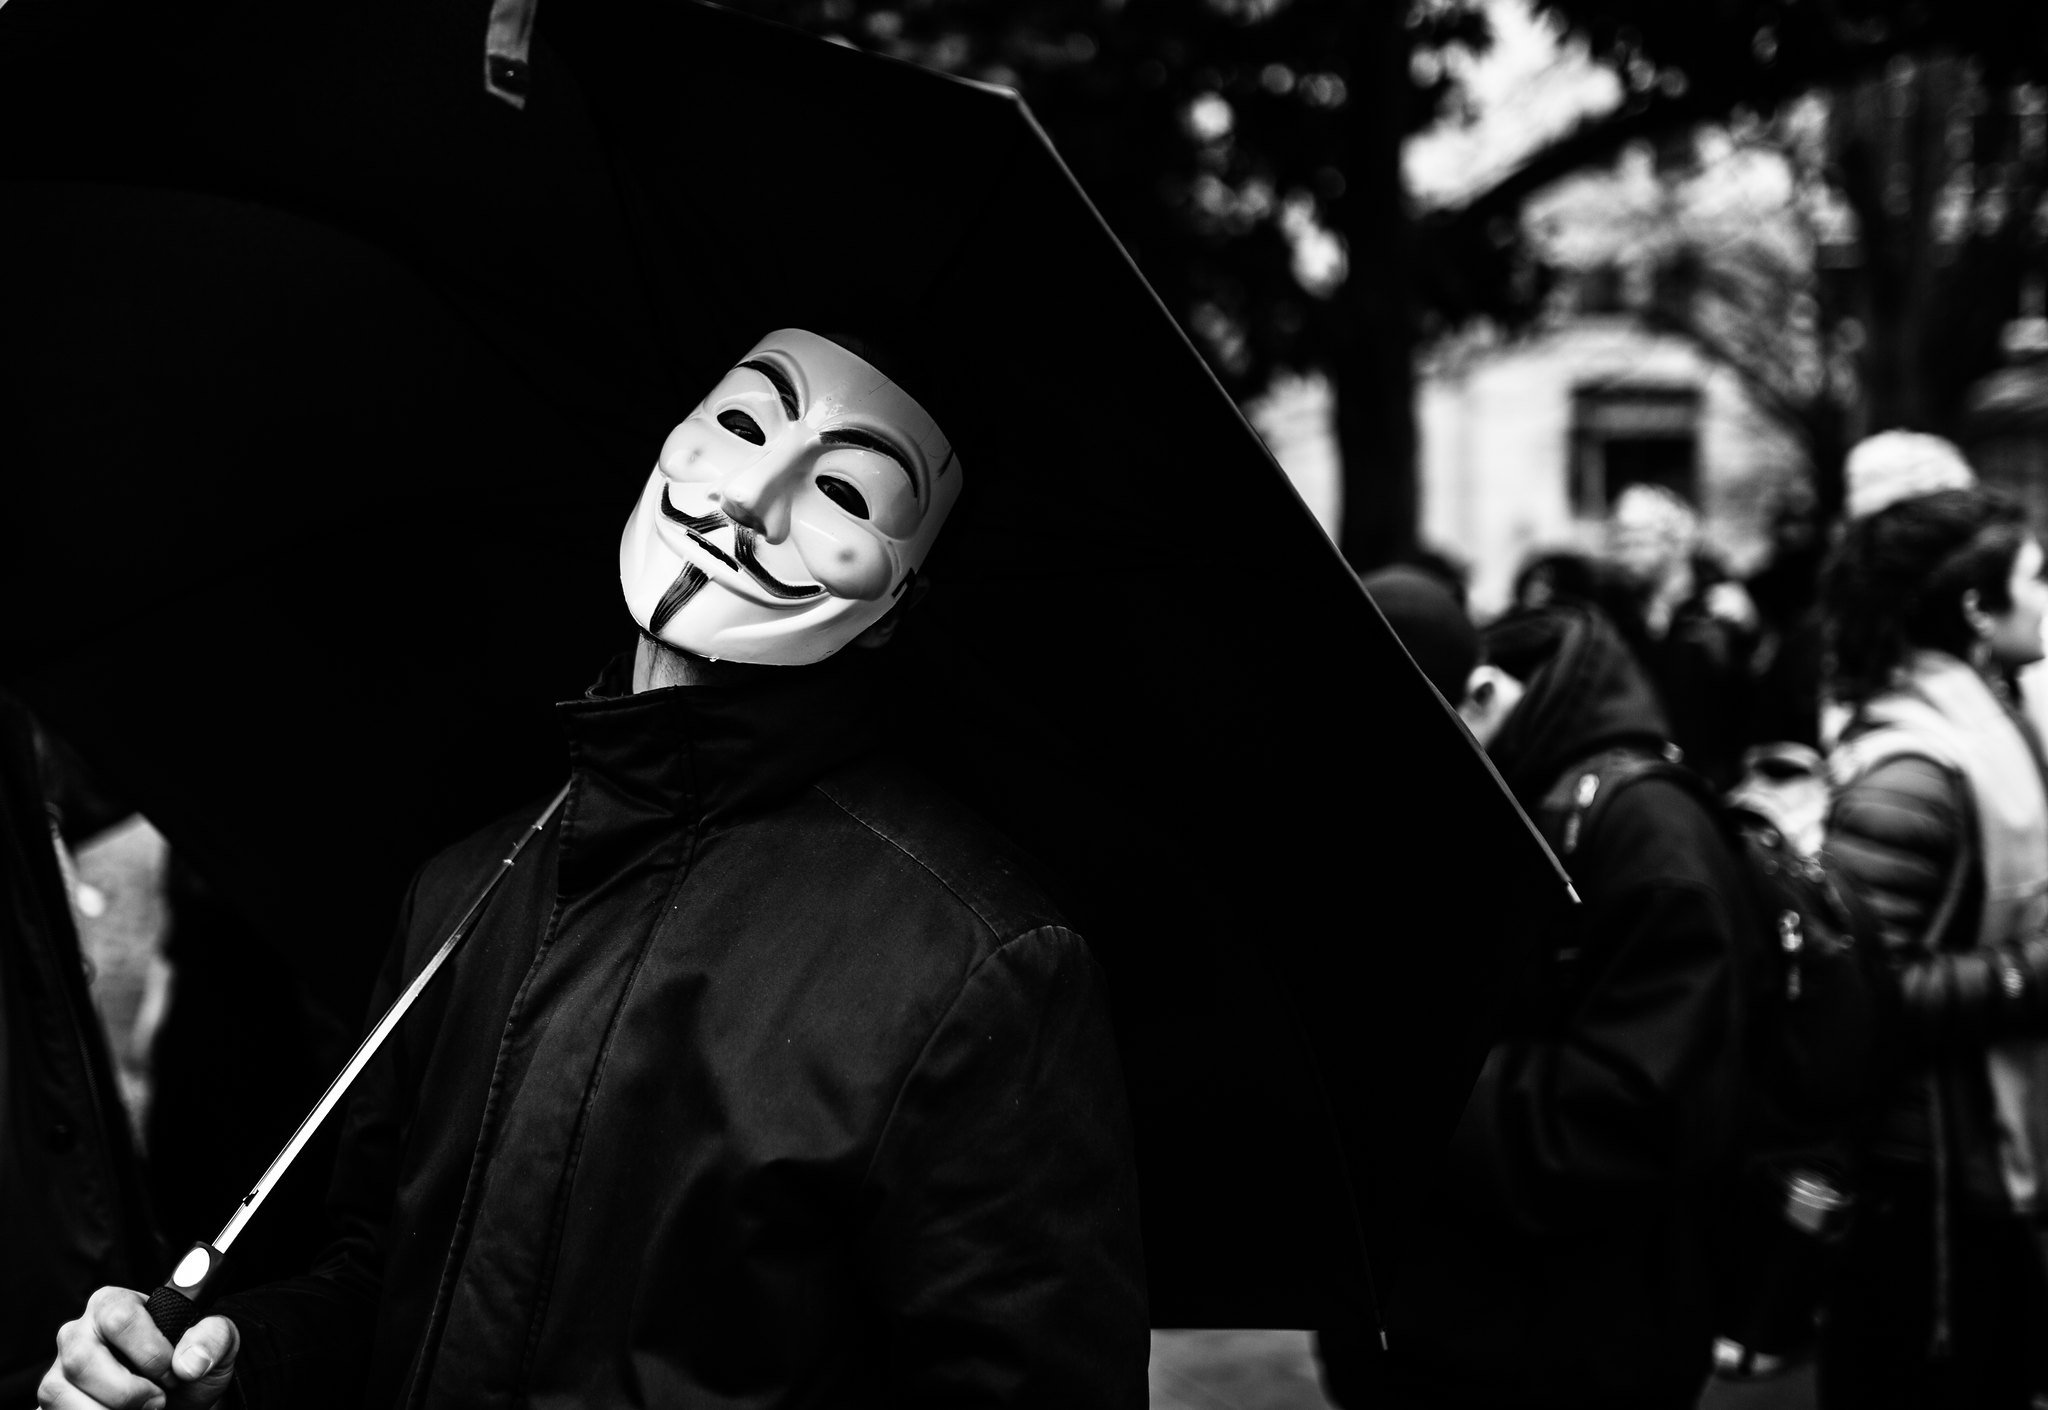 A person wears a mask associated with anonymous, who popularized the term doxxing